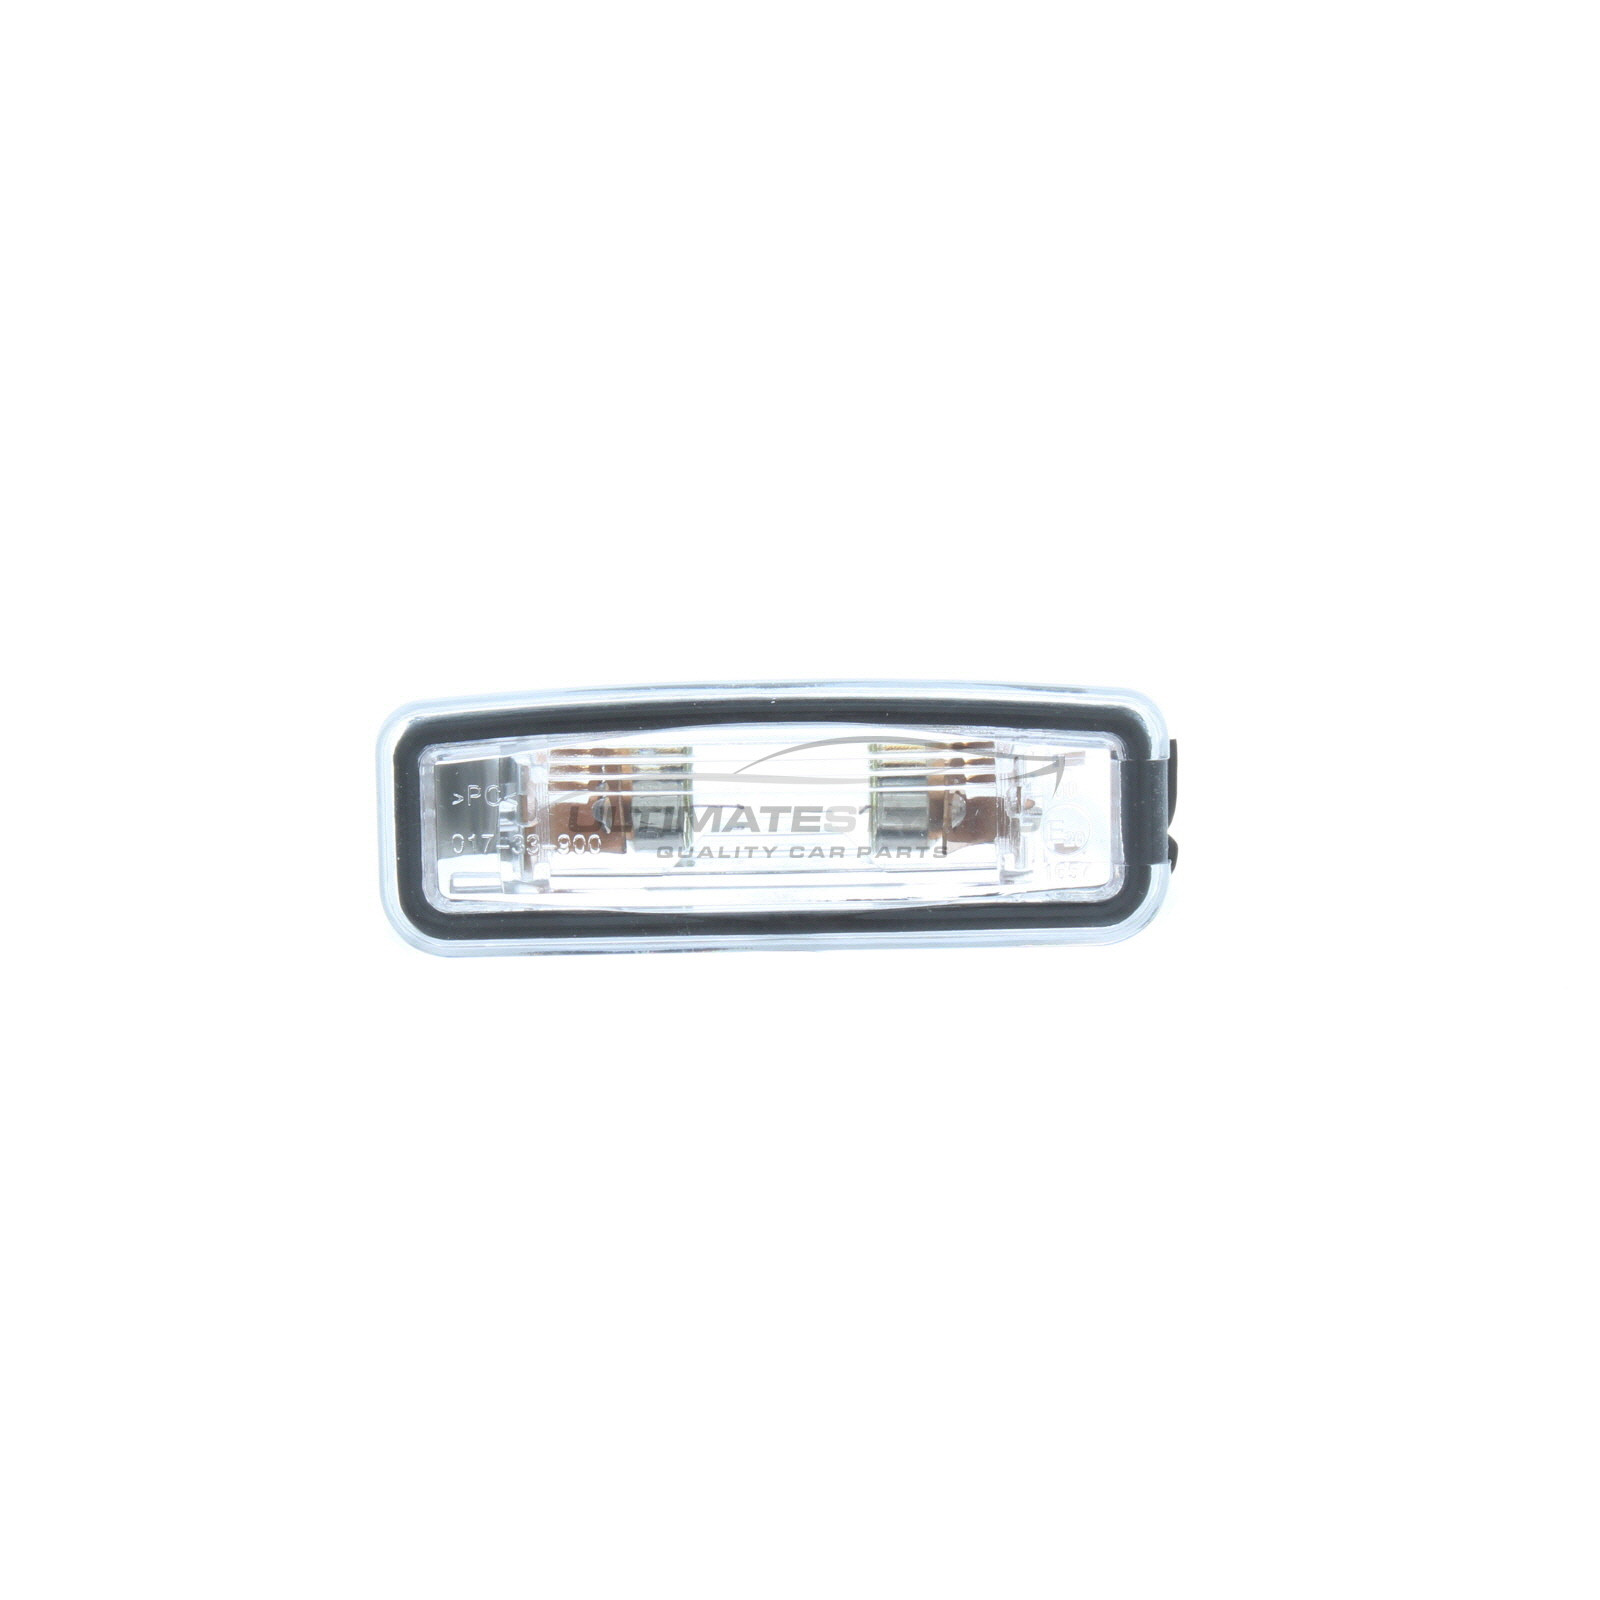 Ford Focus Rear Number Plate Light - Universal (LH or RH)